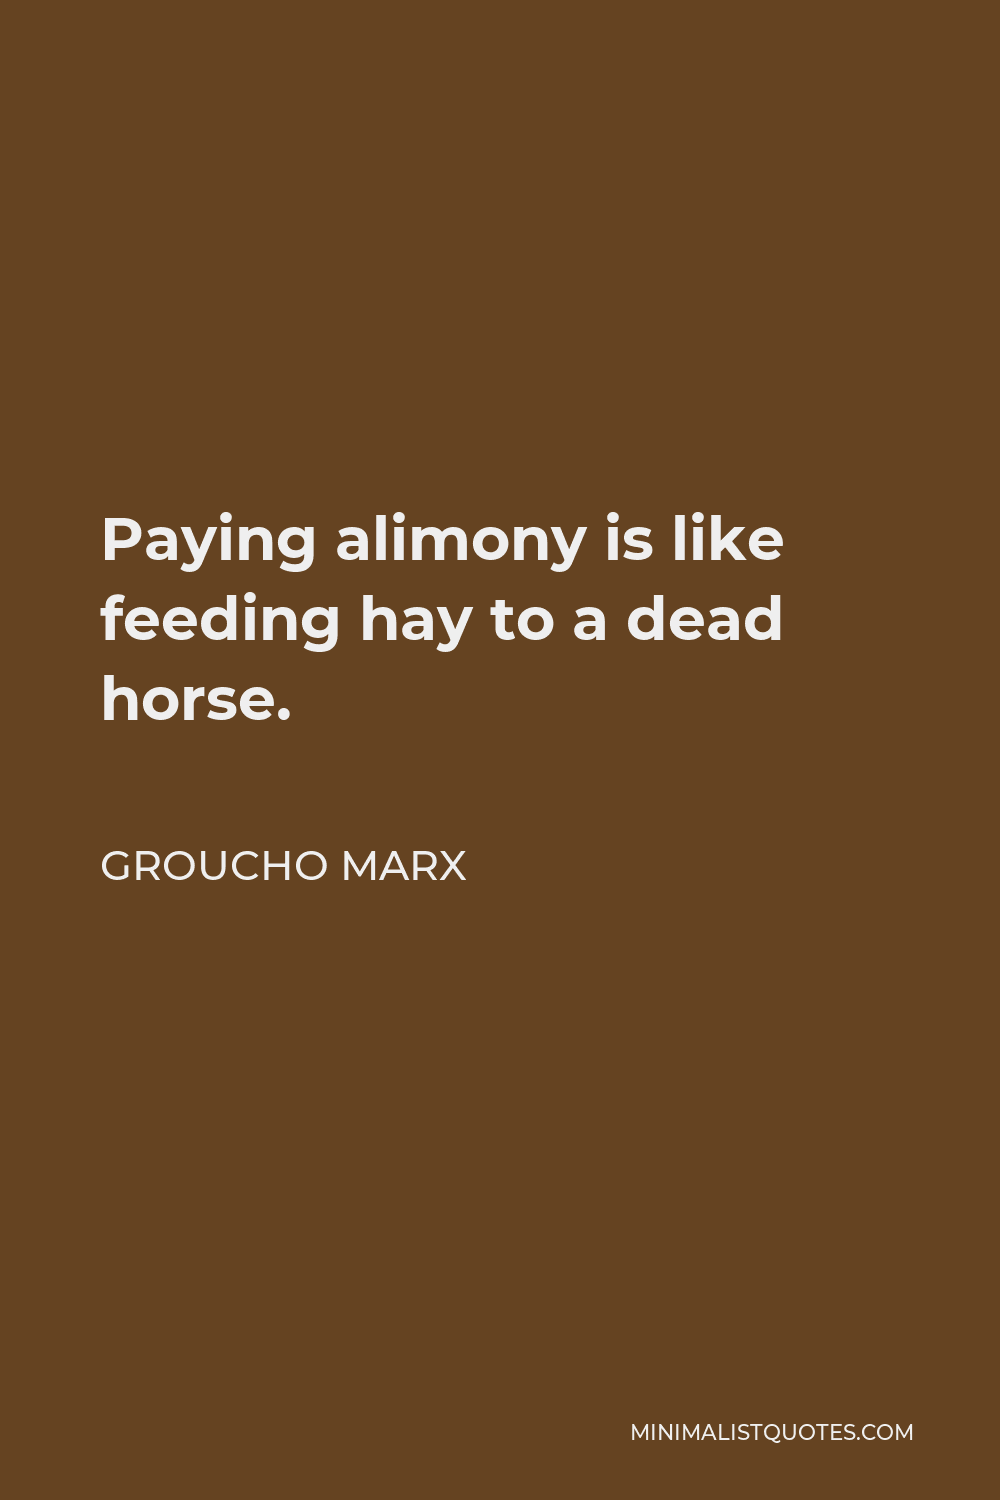 Groucho Marx Quote - Paying alimony is like feeding hay to a dead horse.